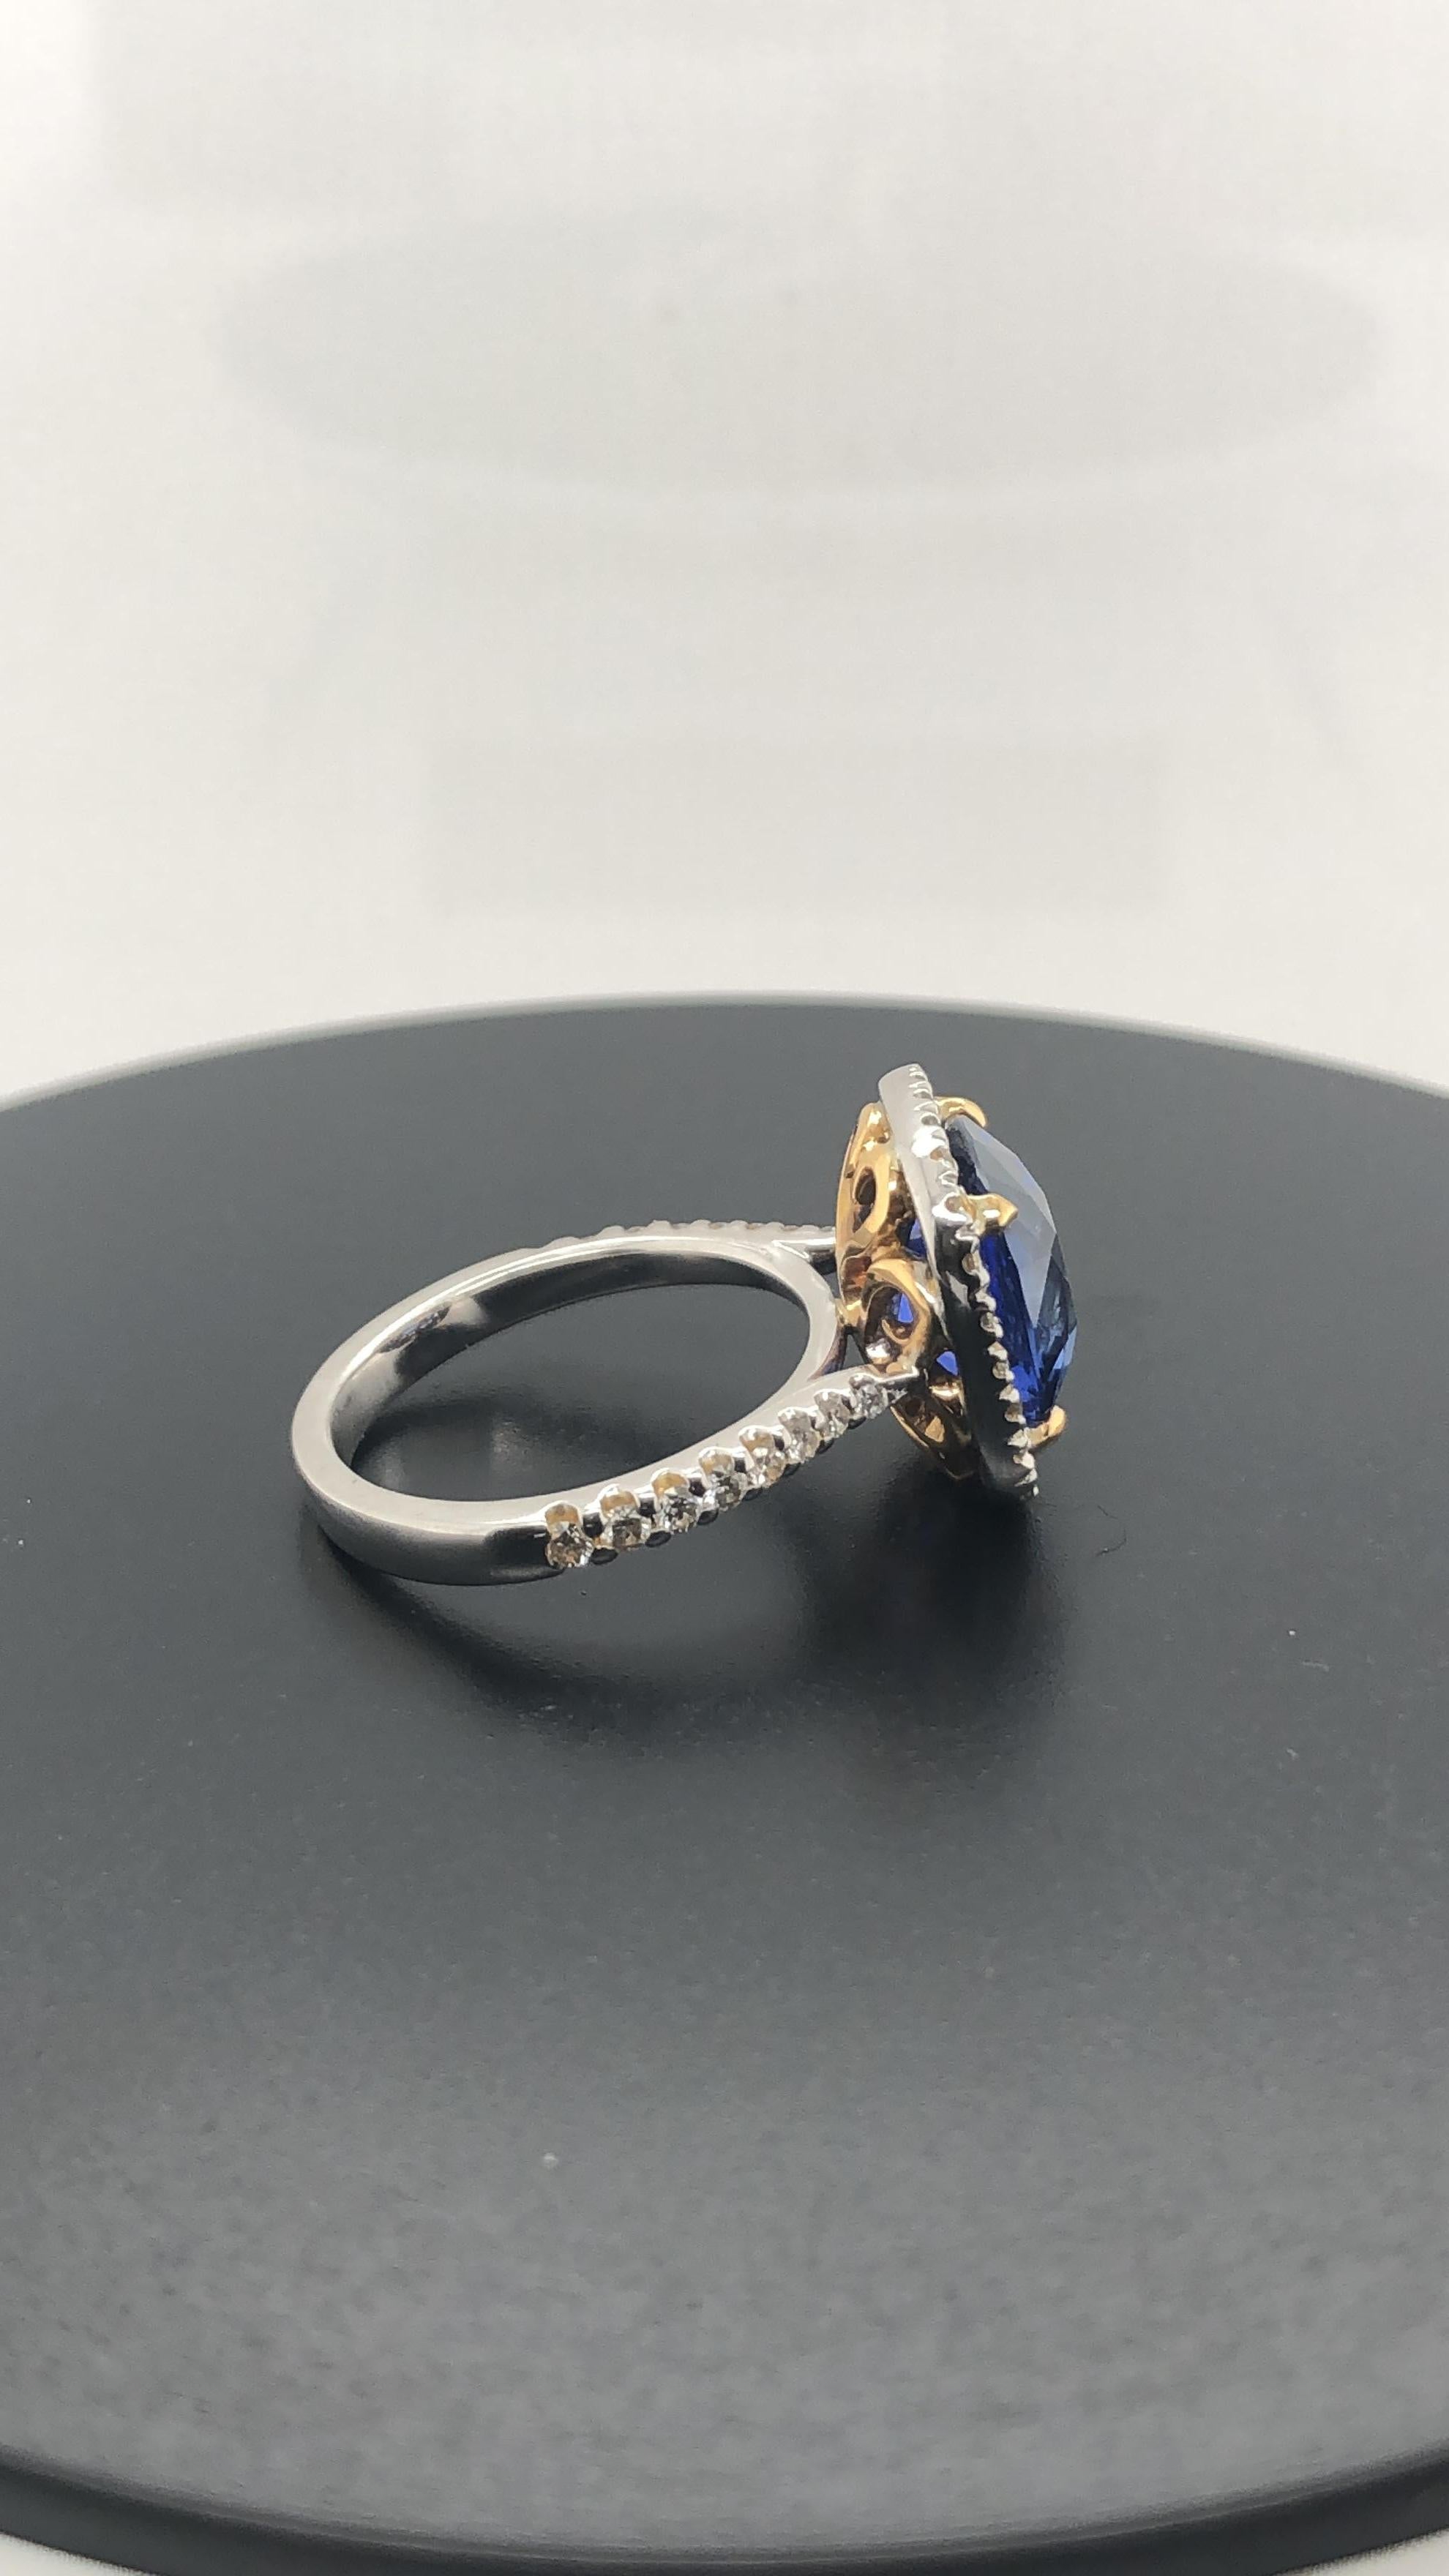 Hand Crafted 18 Carat Rose and White Gold Ring, set with one Certified, Natural, 6.09 Carat, Cushion cut 'Deep Blue' Ceylonese Sapphire as per GSL AA 55221, in rose gold Talon Claws and surrounded by a halo of 24 claw set Round Brilliant cut